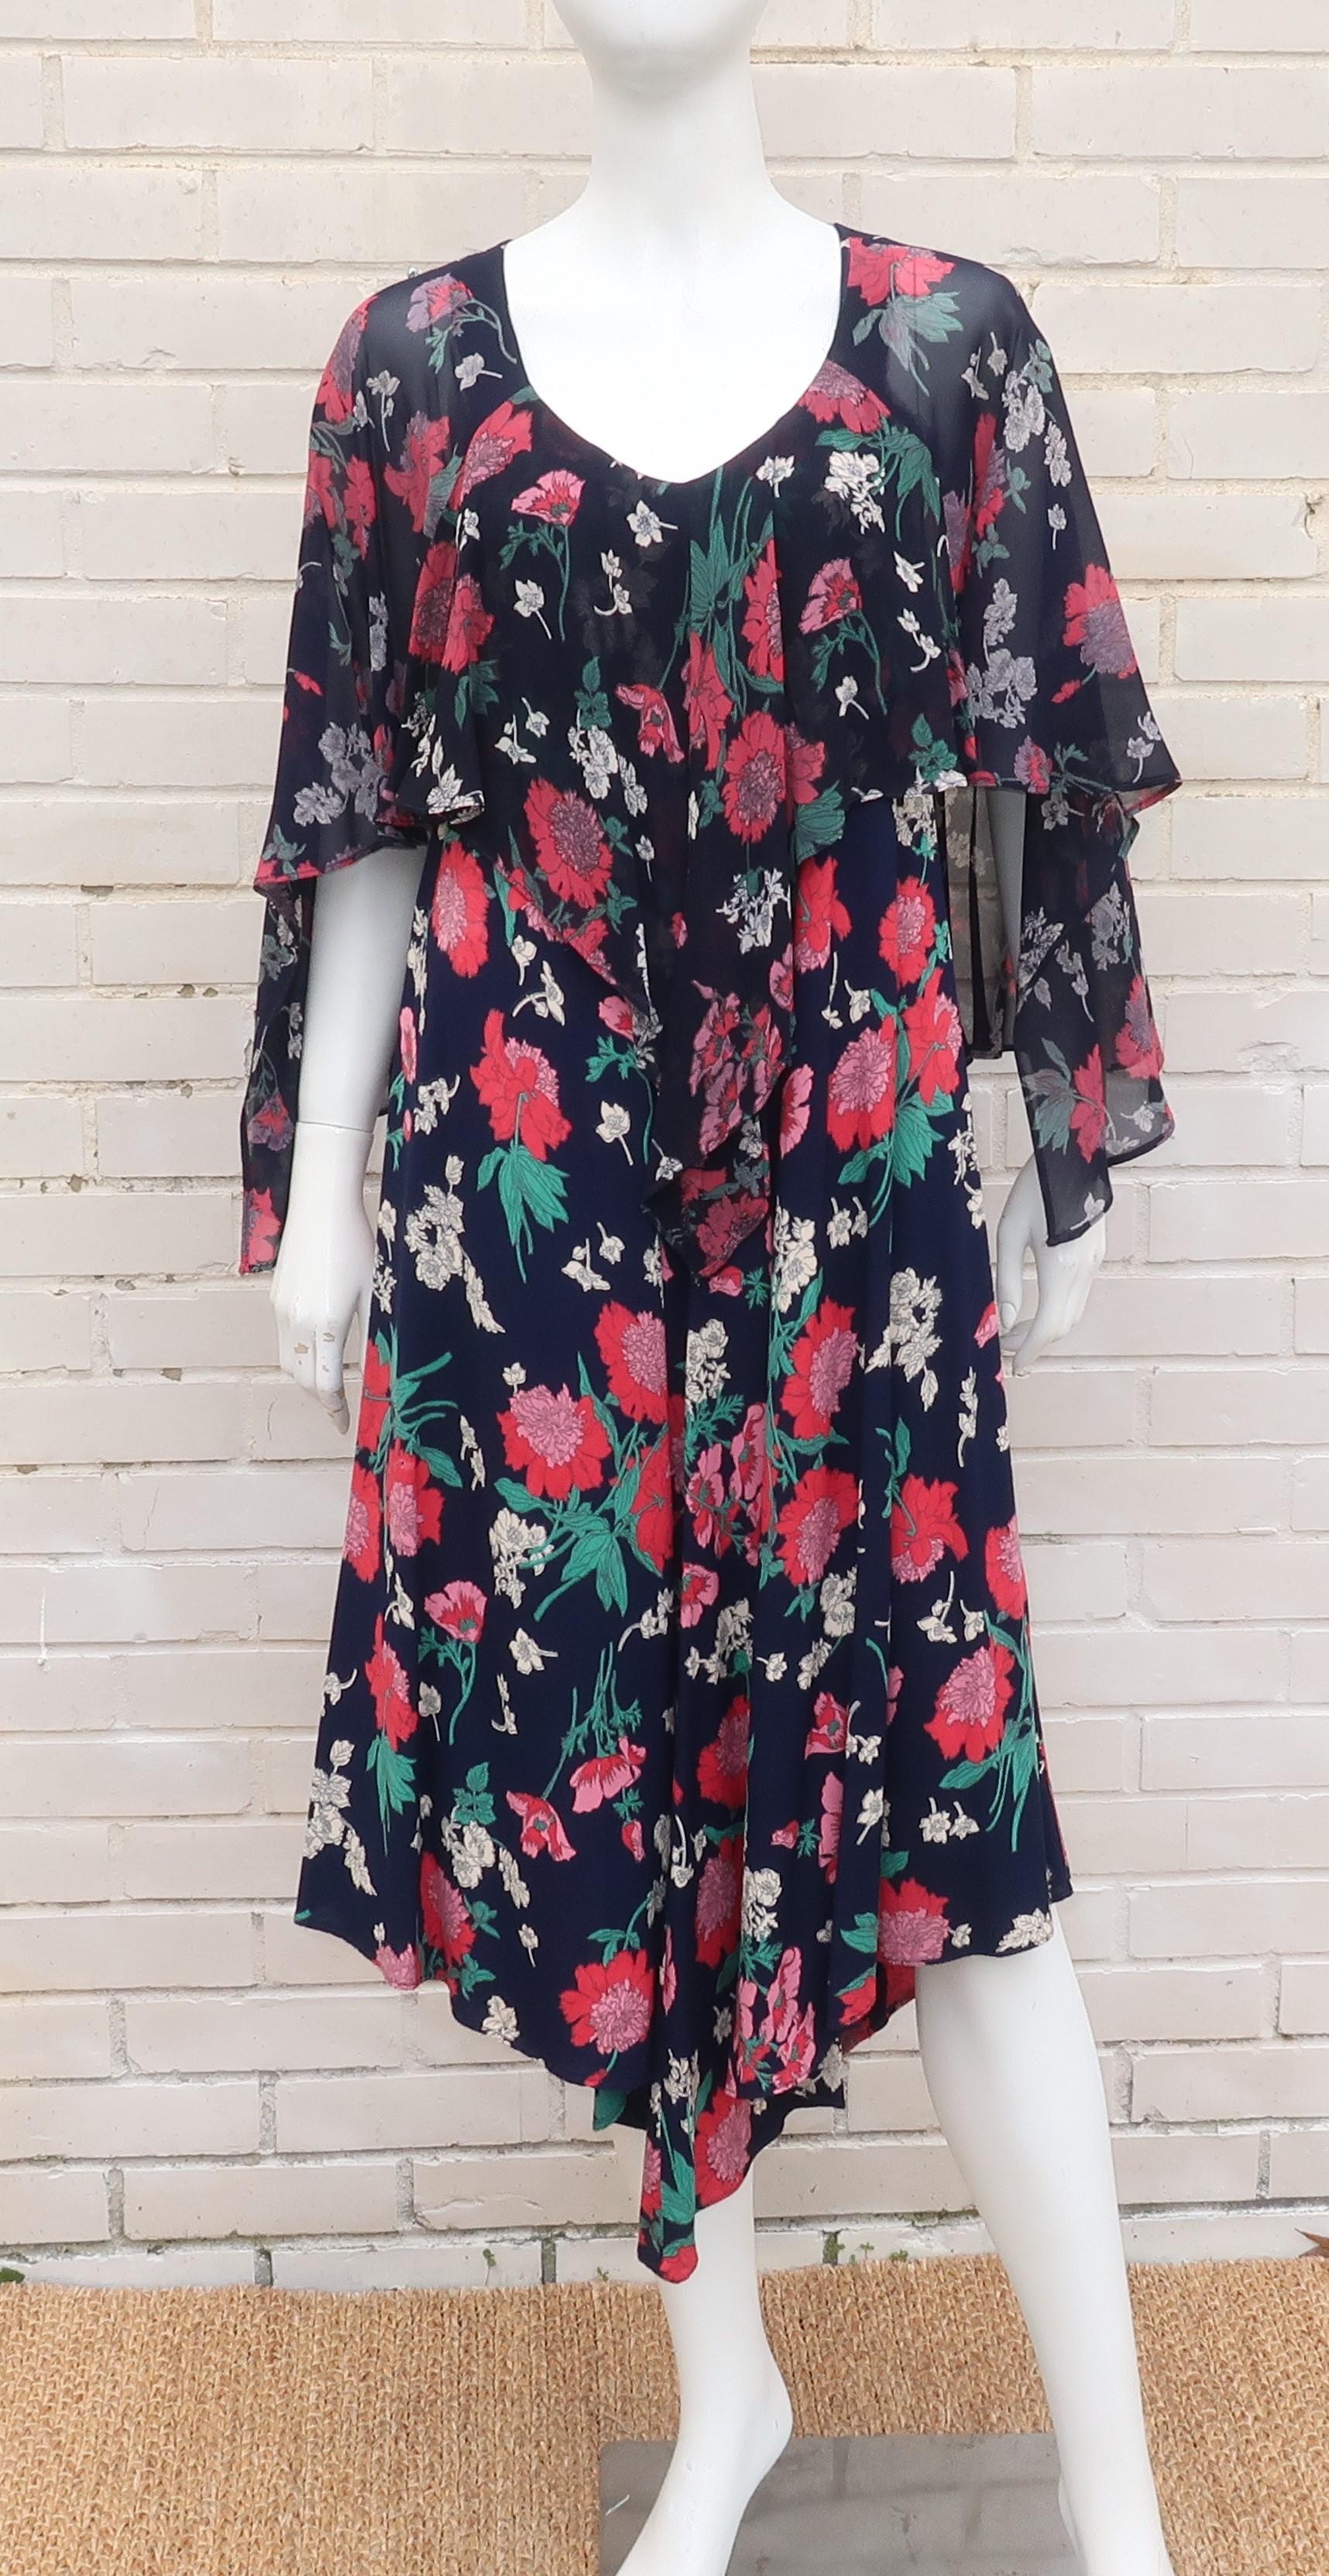 Nicole Miller perfects a boho chic vibe with this 1970's design for the P.J. Walsh label.  The pullover dress is a dark midnight blue (almost black) floral print with accents of red, pink, green, lavender and white in the design.  The body of the